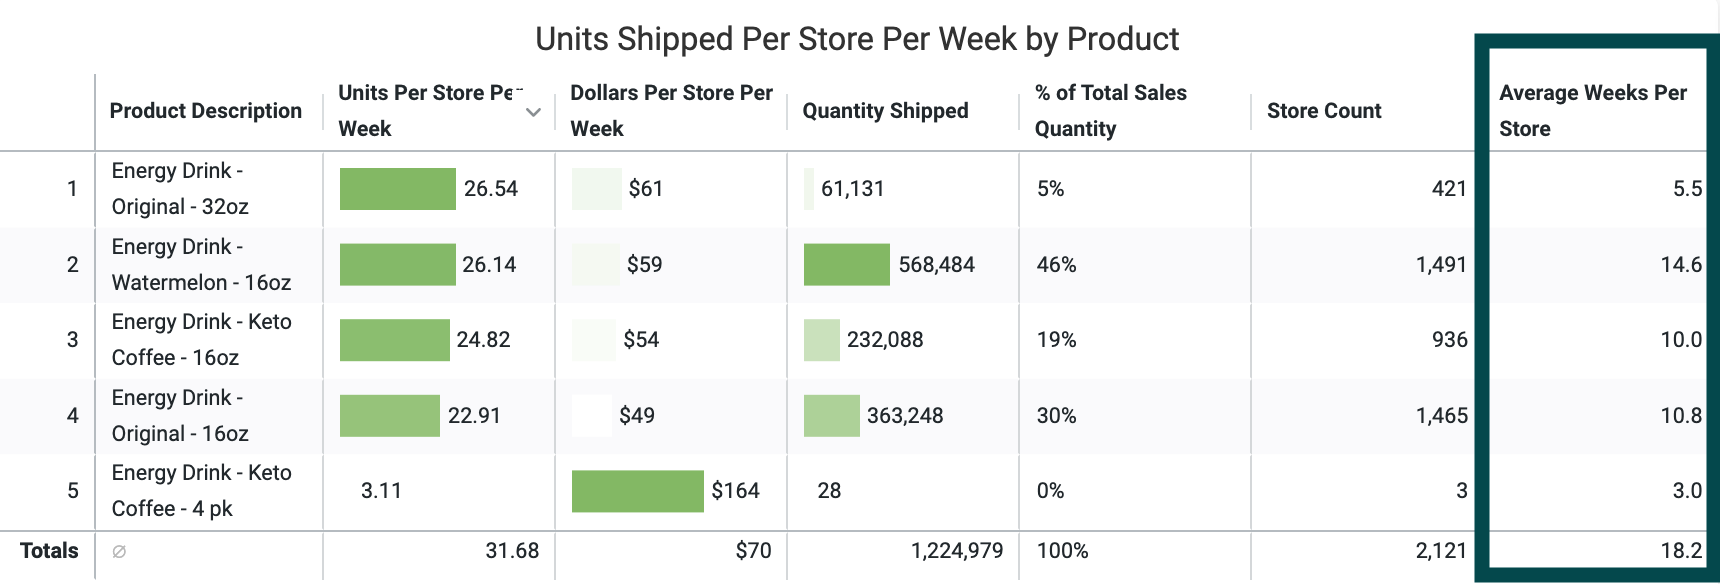 Units_Shipped_Per_Store_Per_Week_by_Product_Excluding_Zero_Sales_Weeks.png